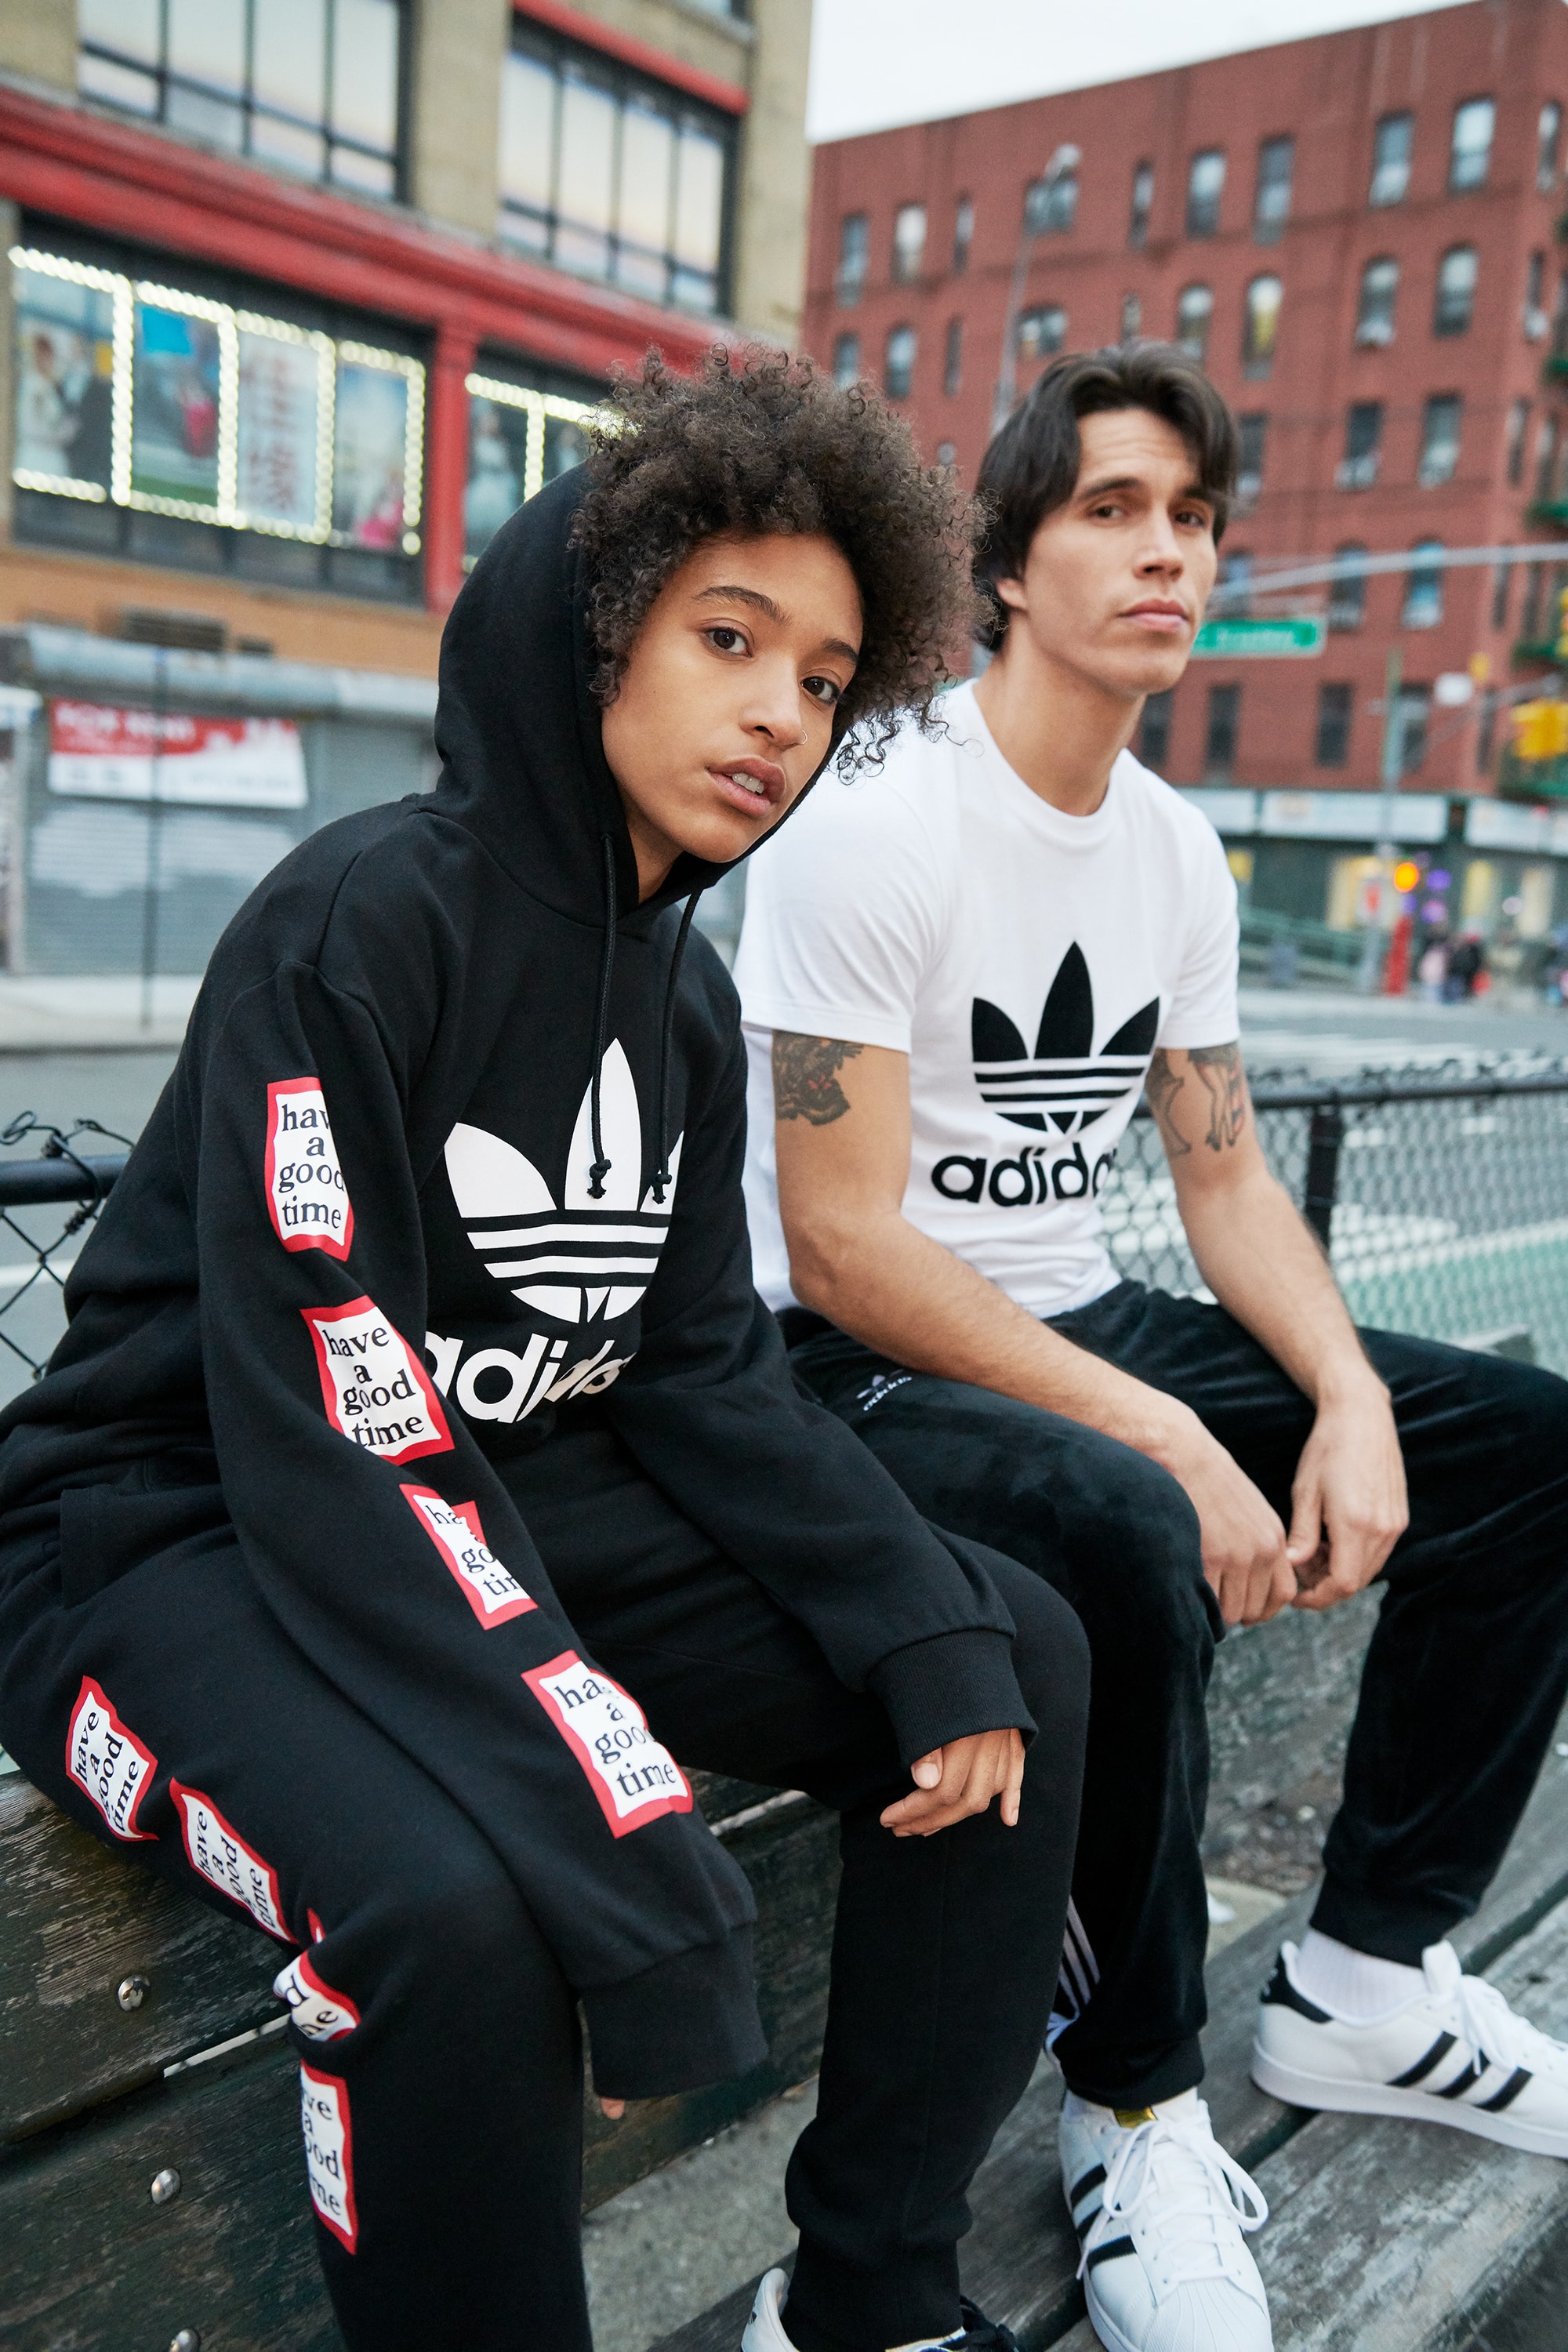 adidas Originals by have a good time 全新聯名系列正式發佈